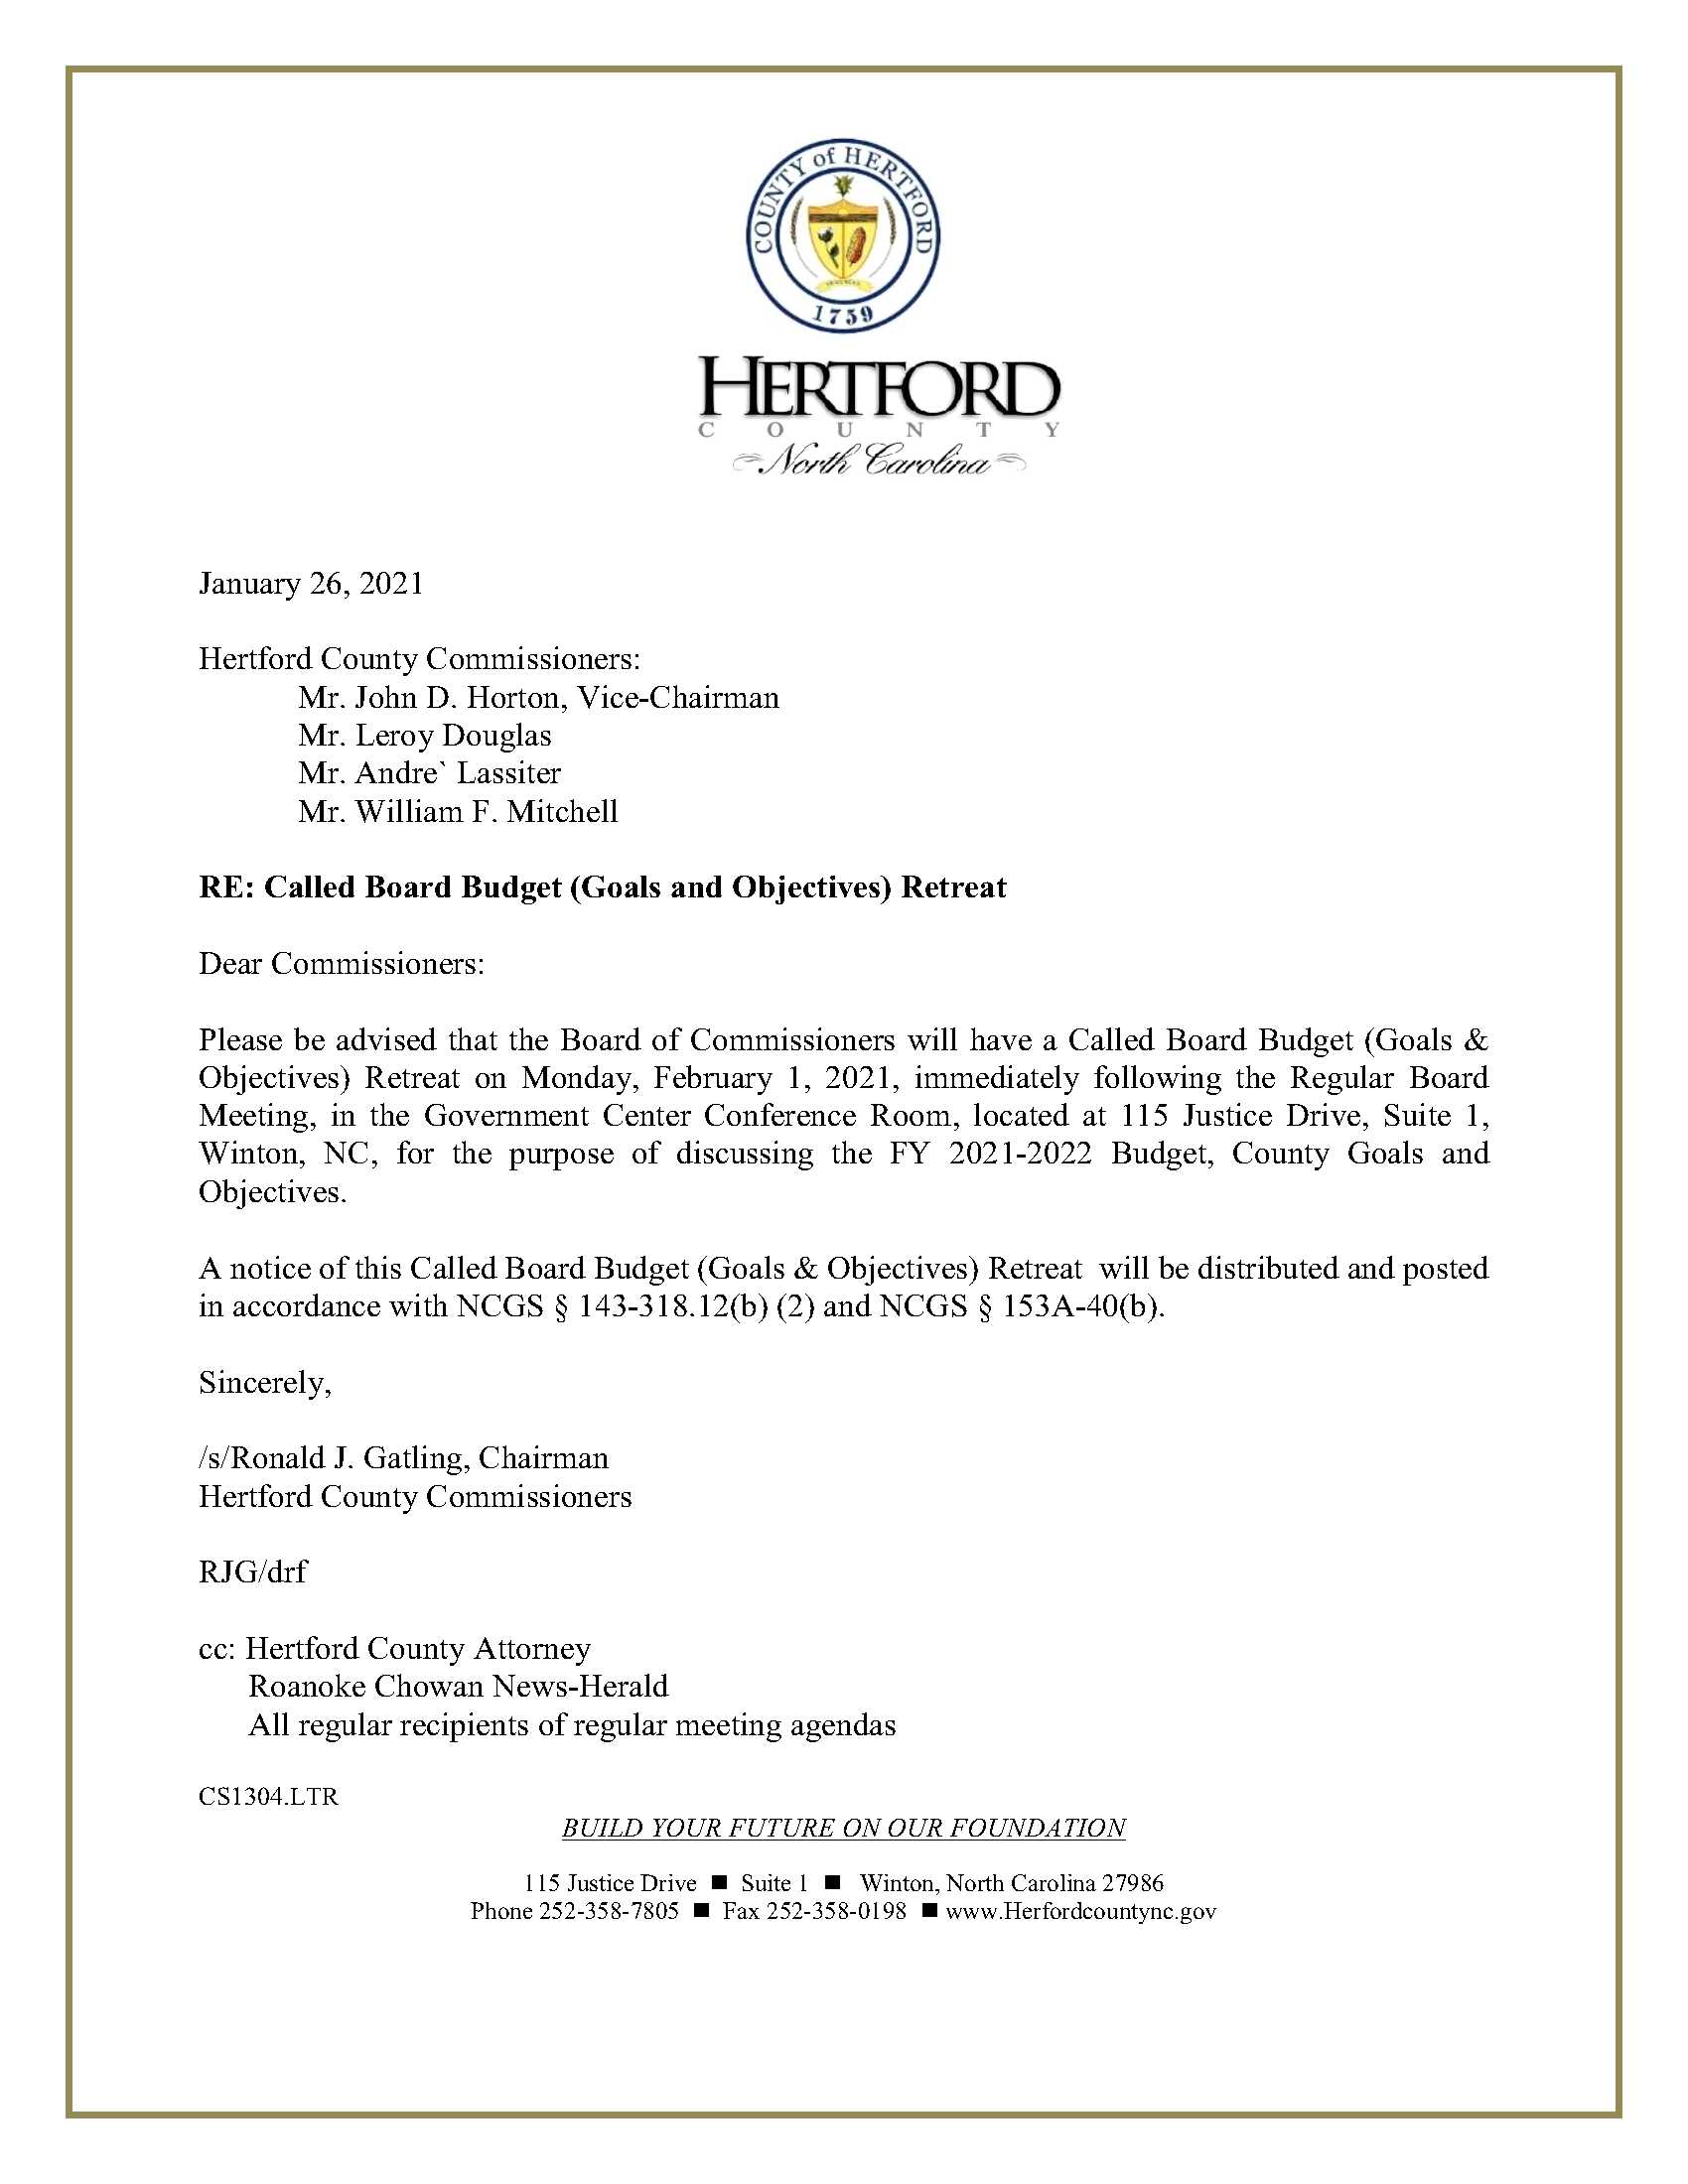 Notice  of Called Board Retreat_02012021